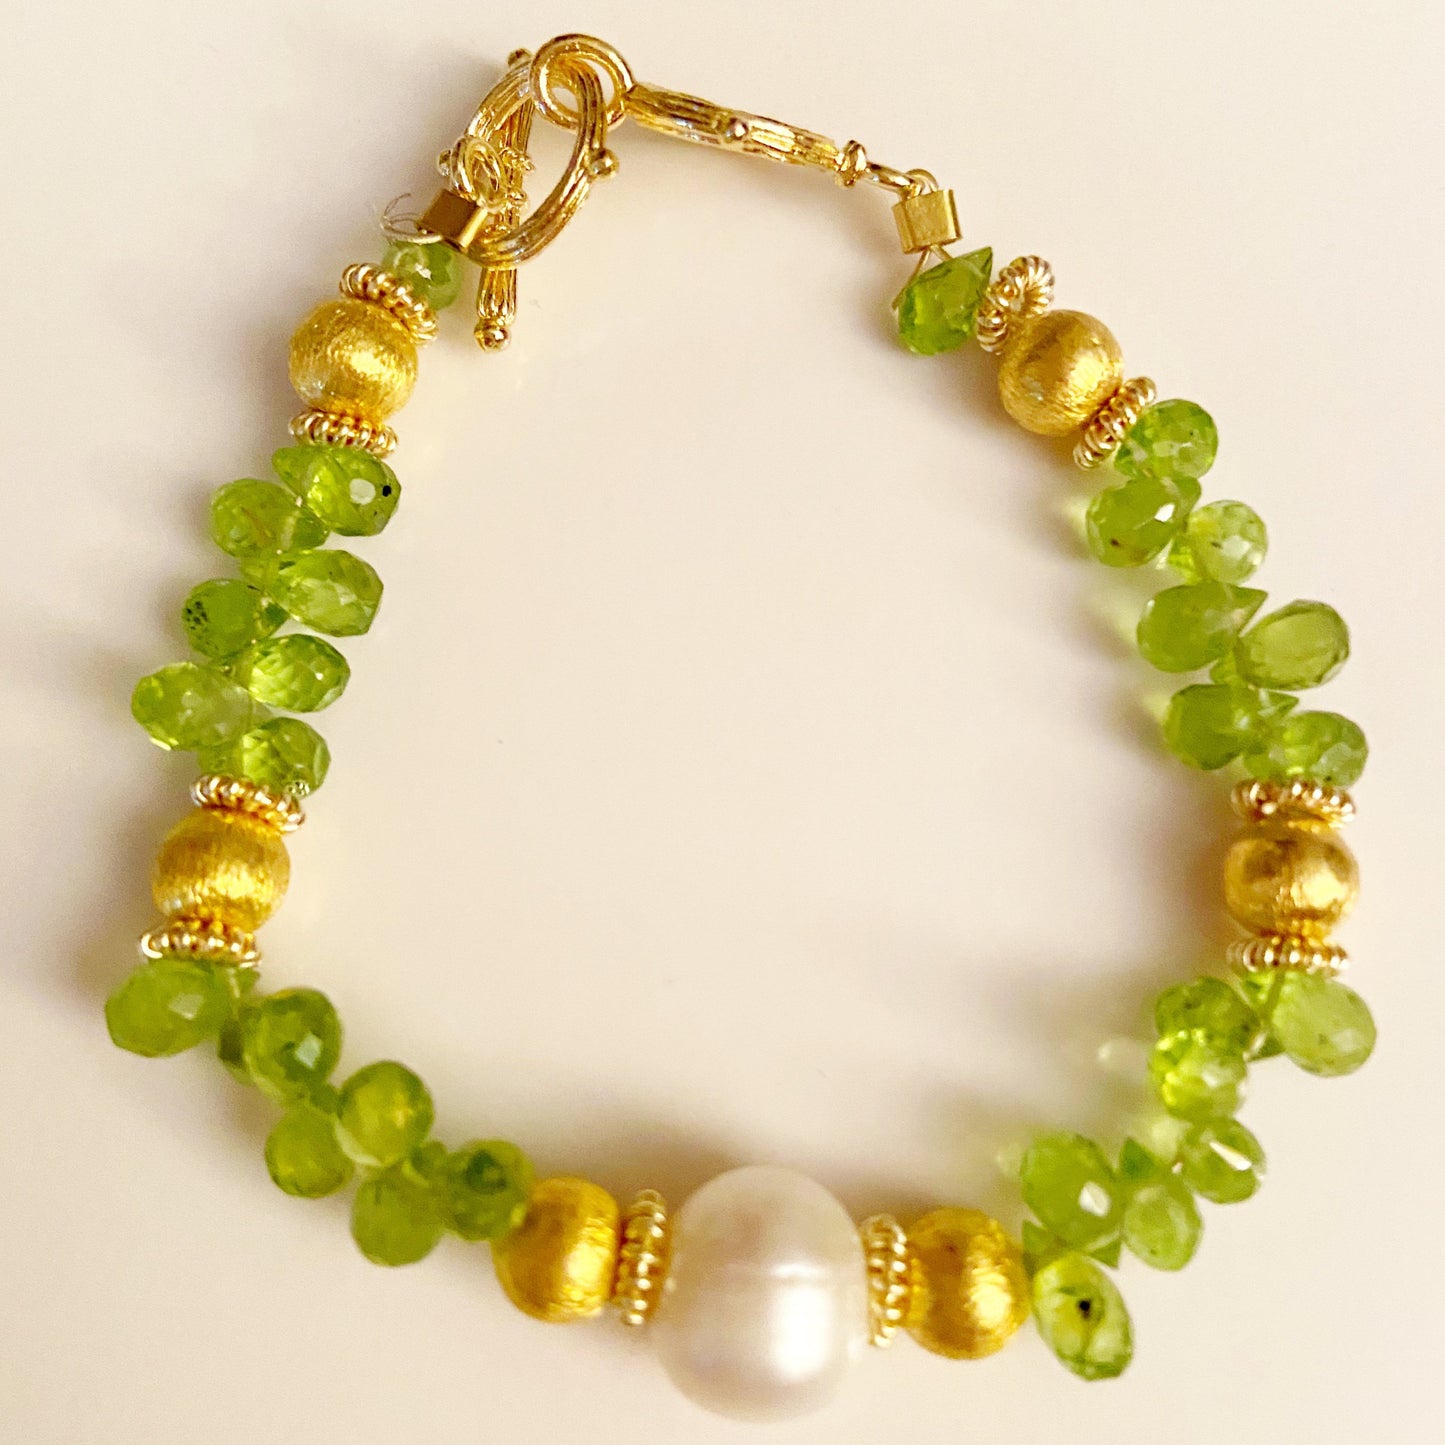 Light Green Peridot Briolette-Cut Gemstone Bracelet with Freshwater Baroque Pearl and 18k Gold Vermeil with Toggle Clasp